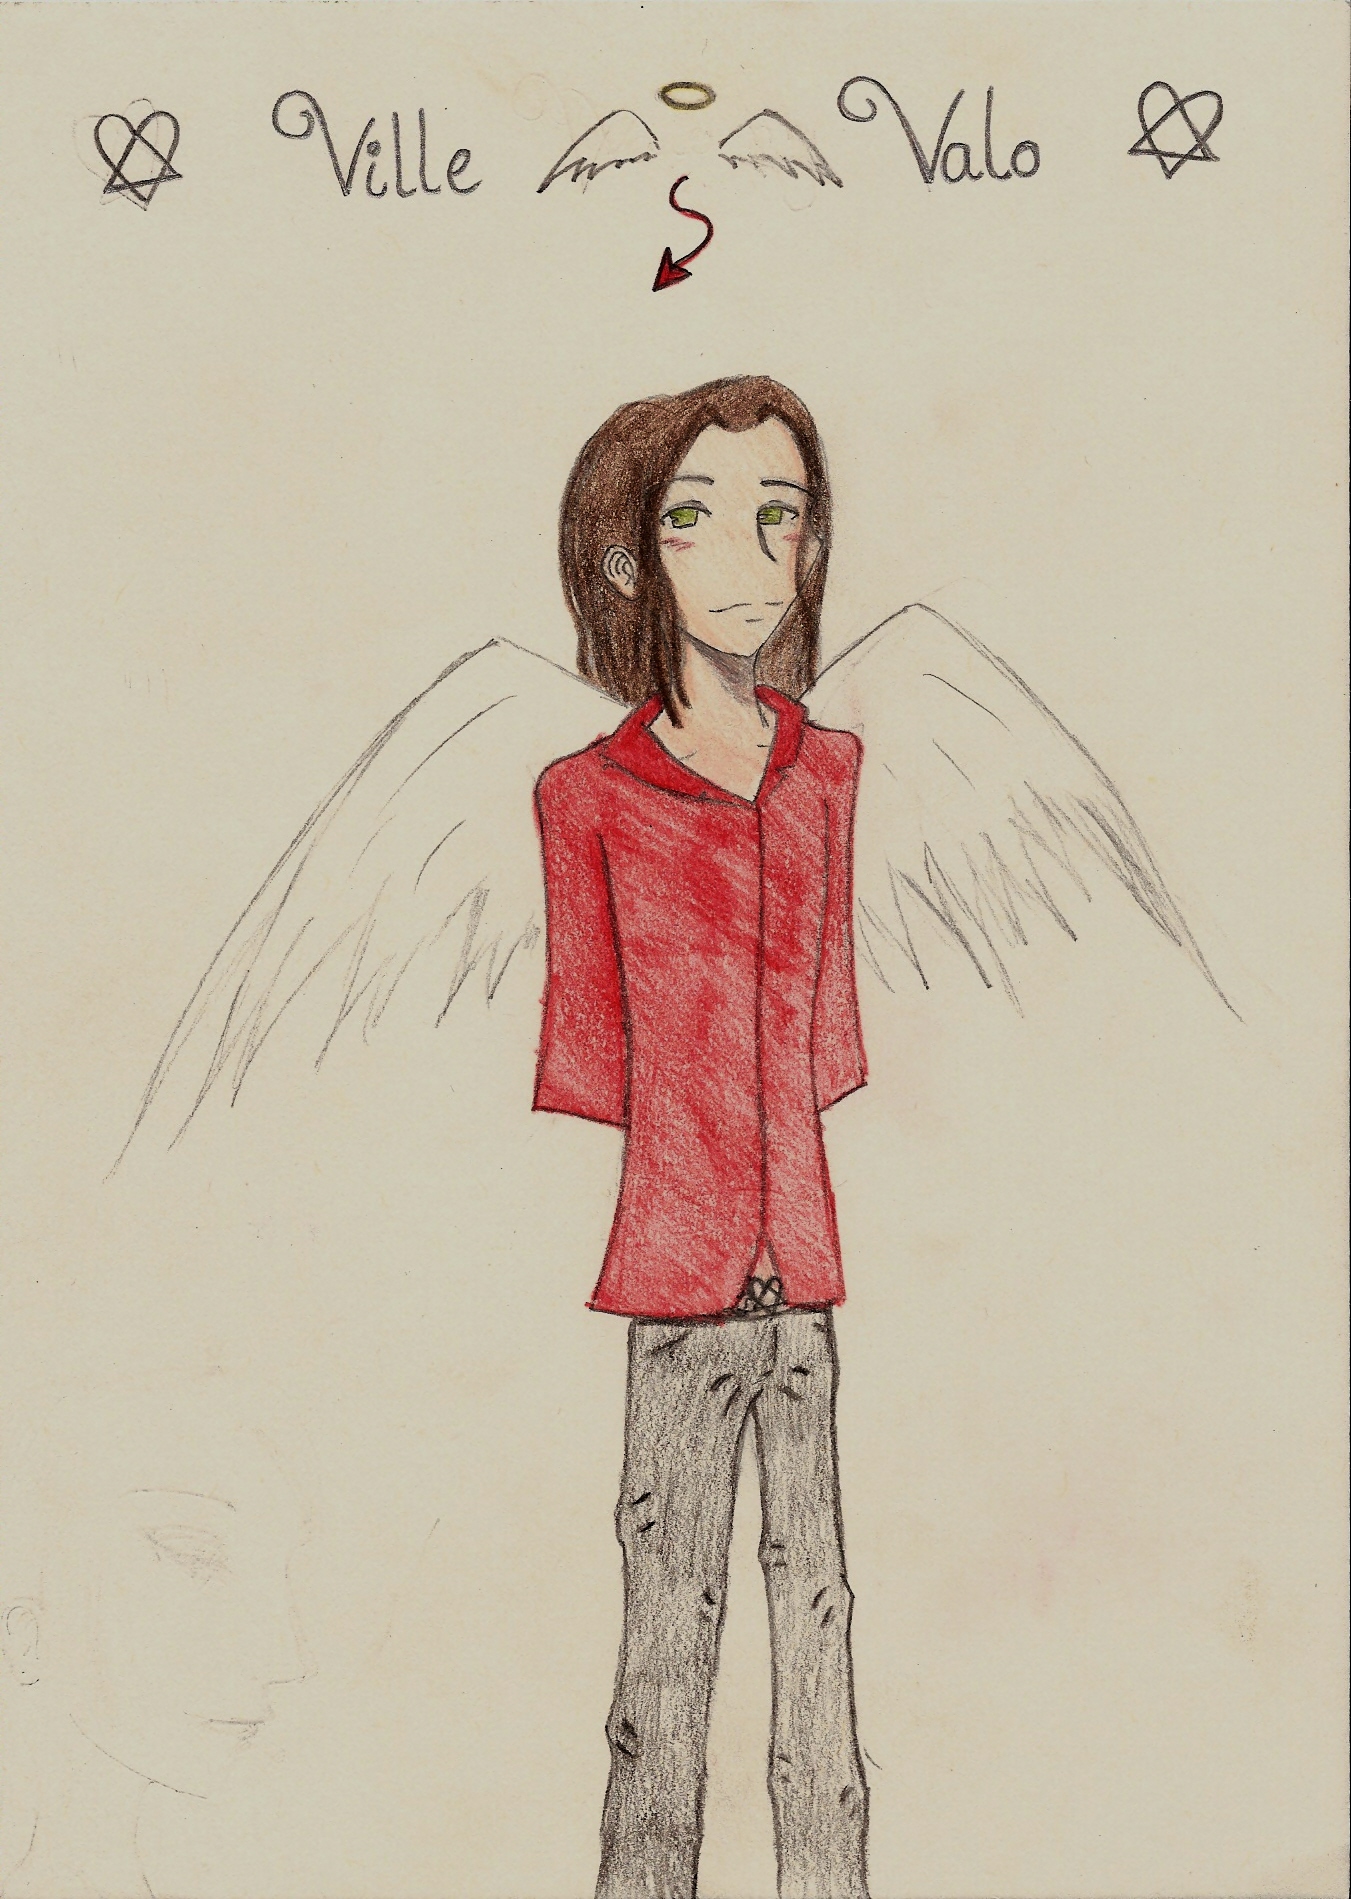 Ville The Angel by stupot